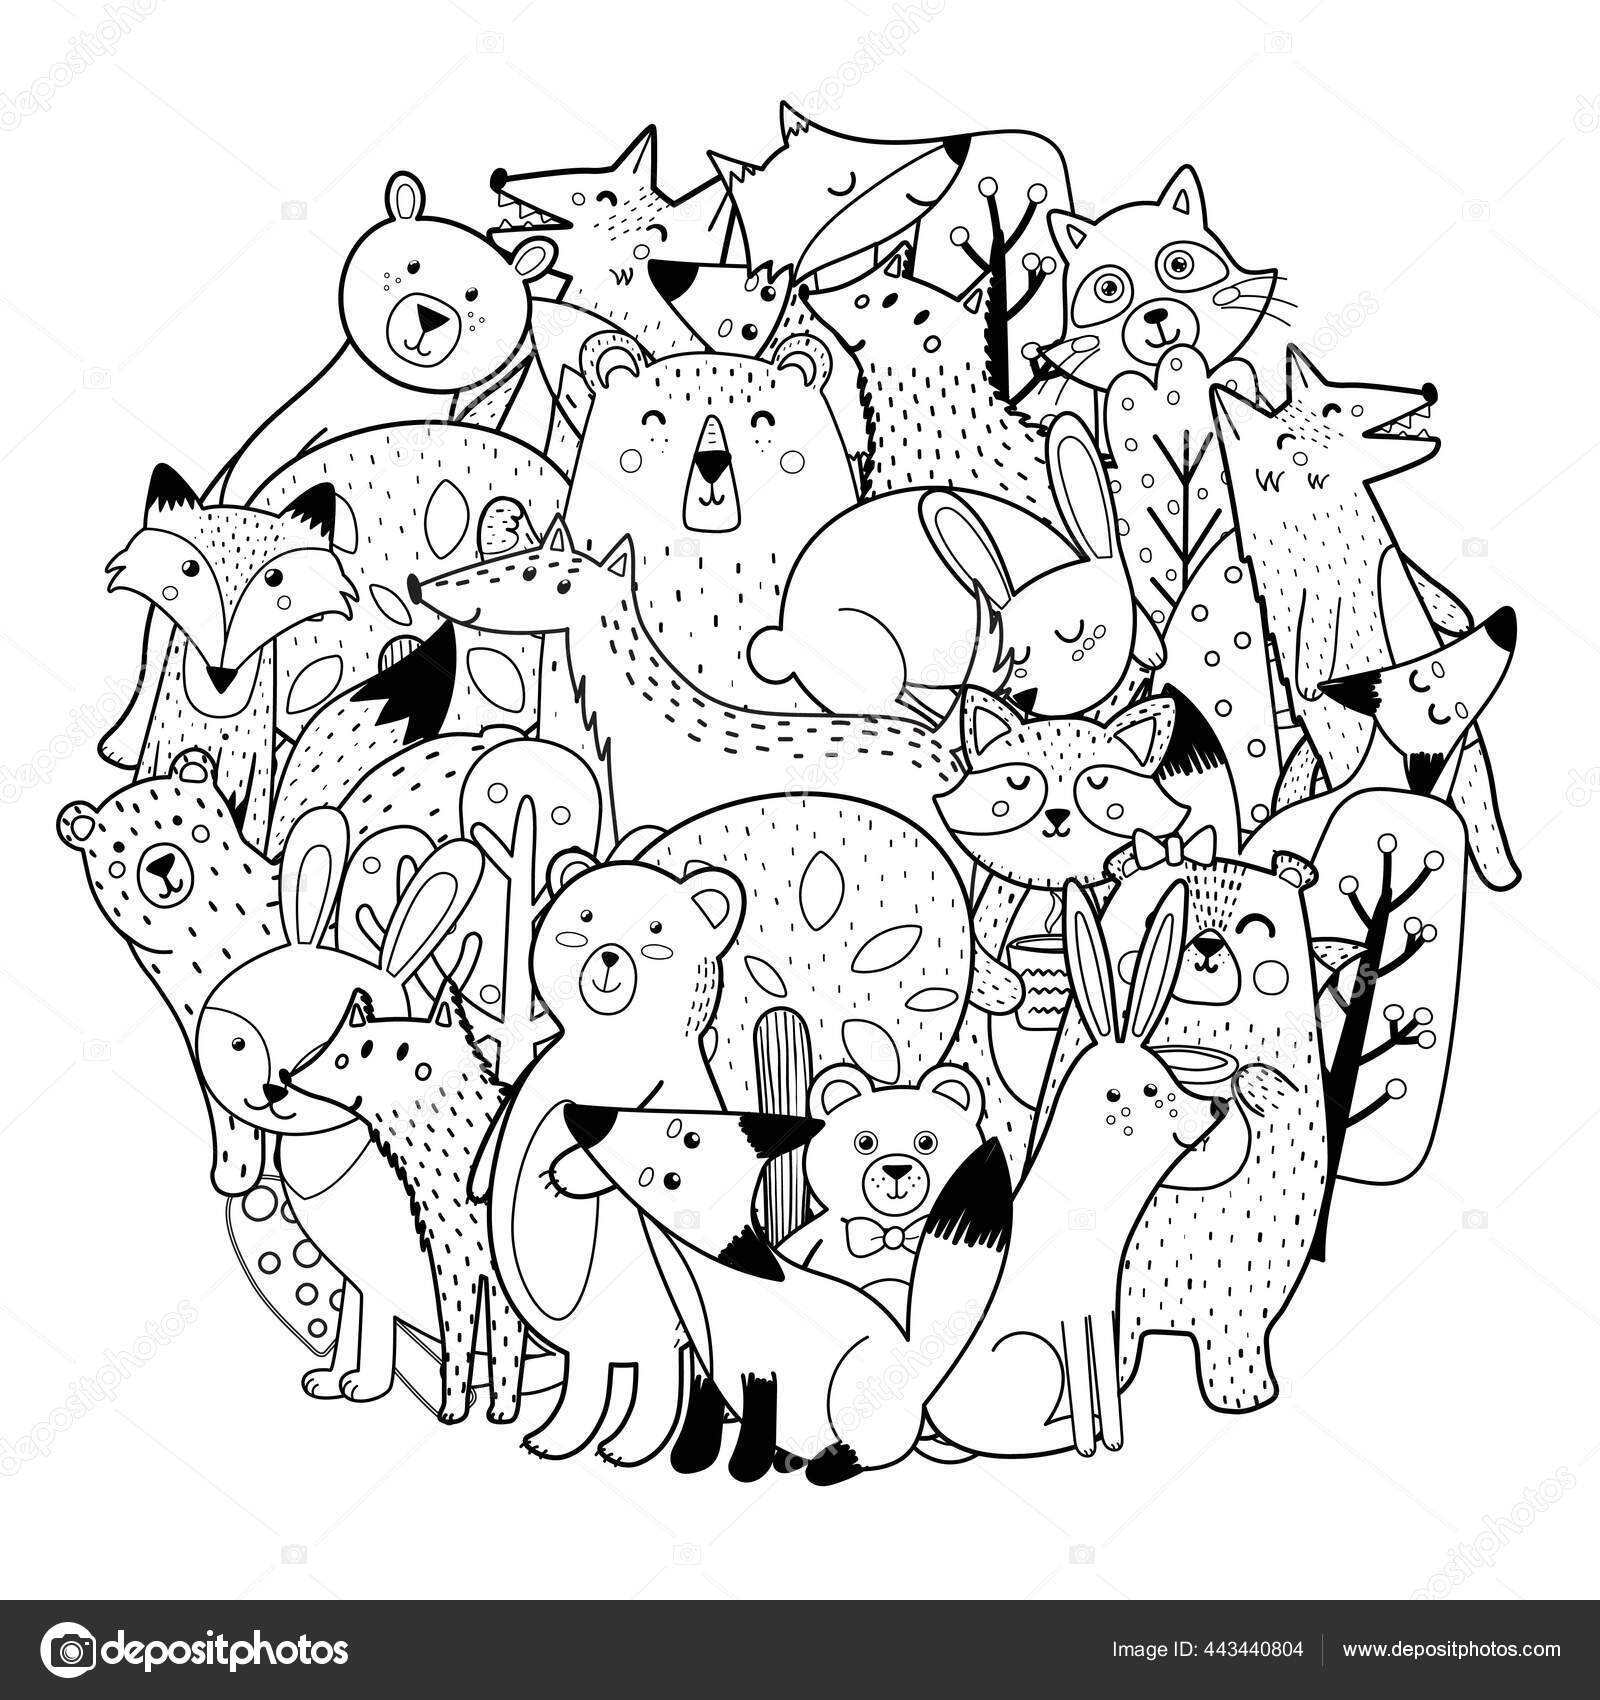 Circle shape coloring page with funny forest characters. Cute ...